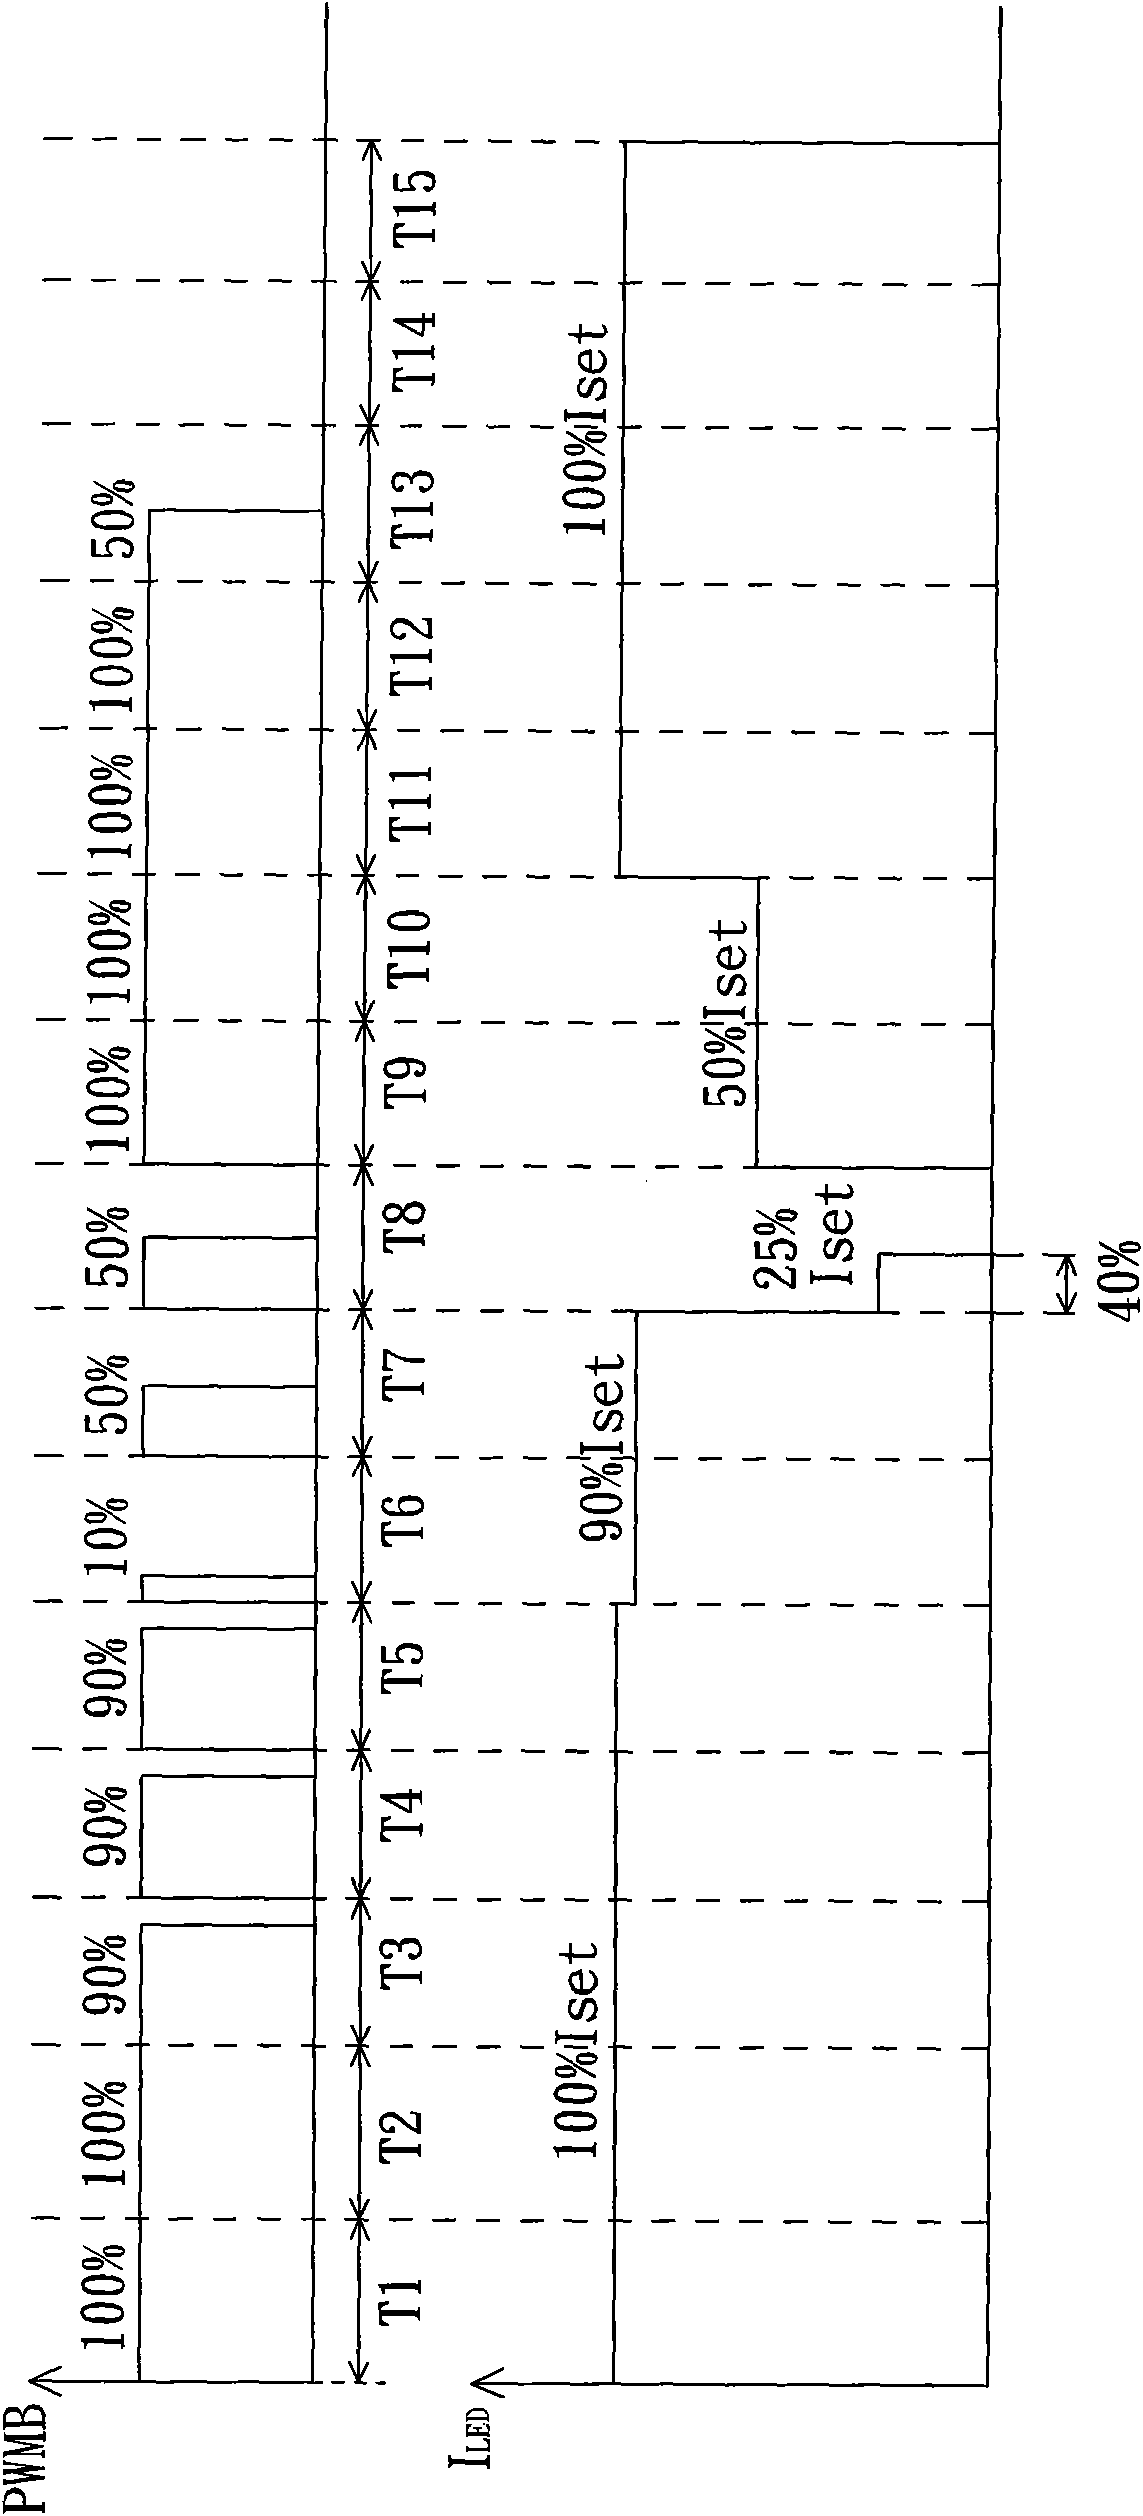 LED driving method and LED driving circuit